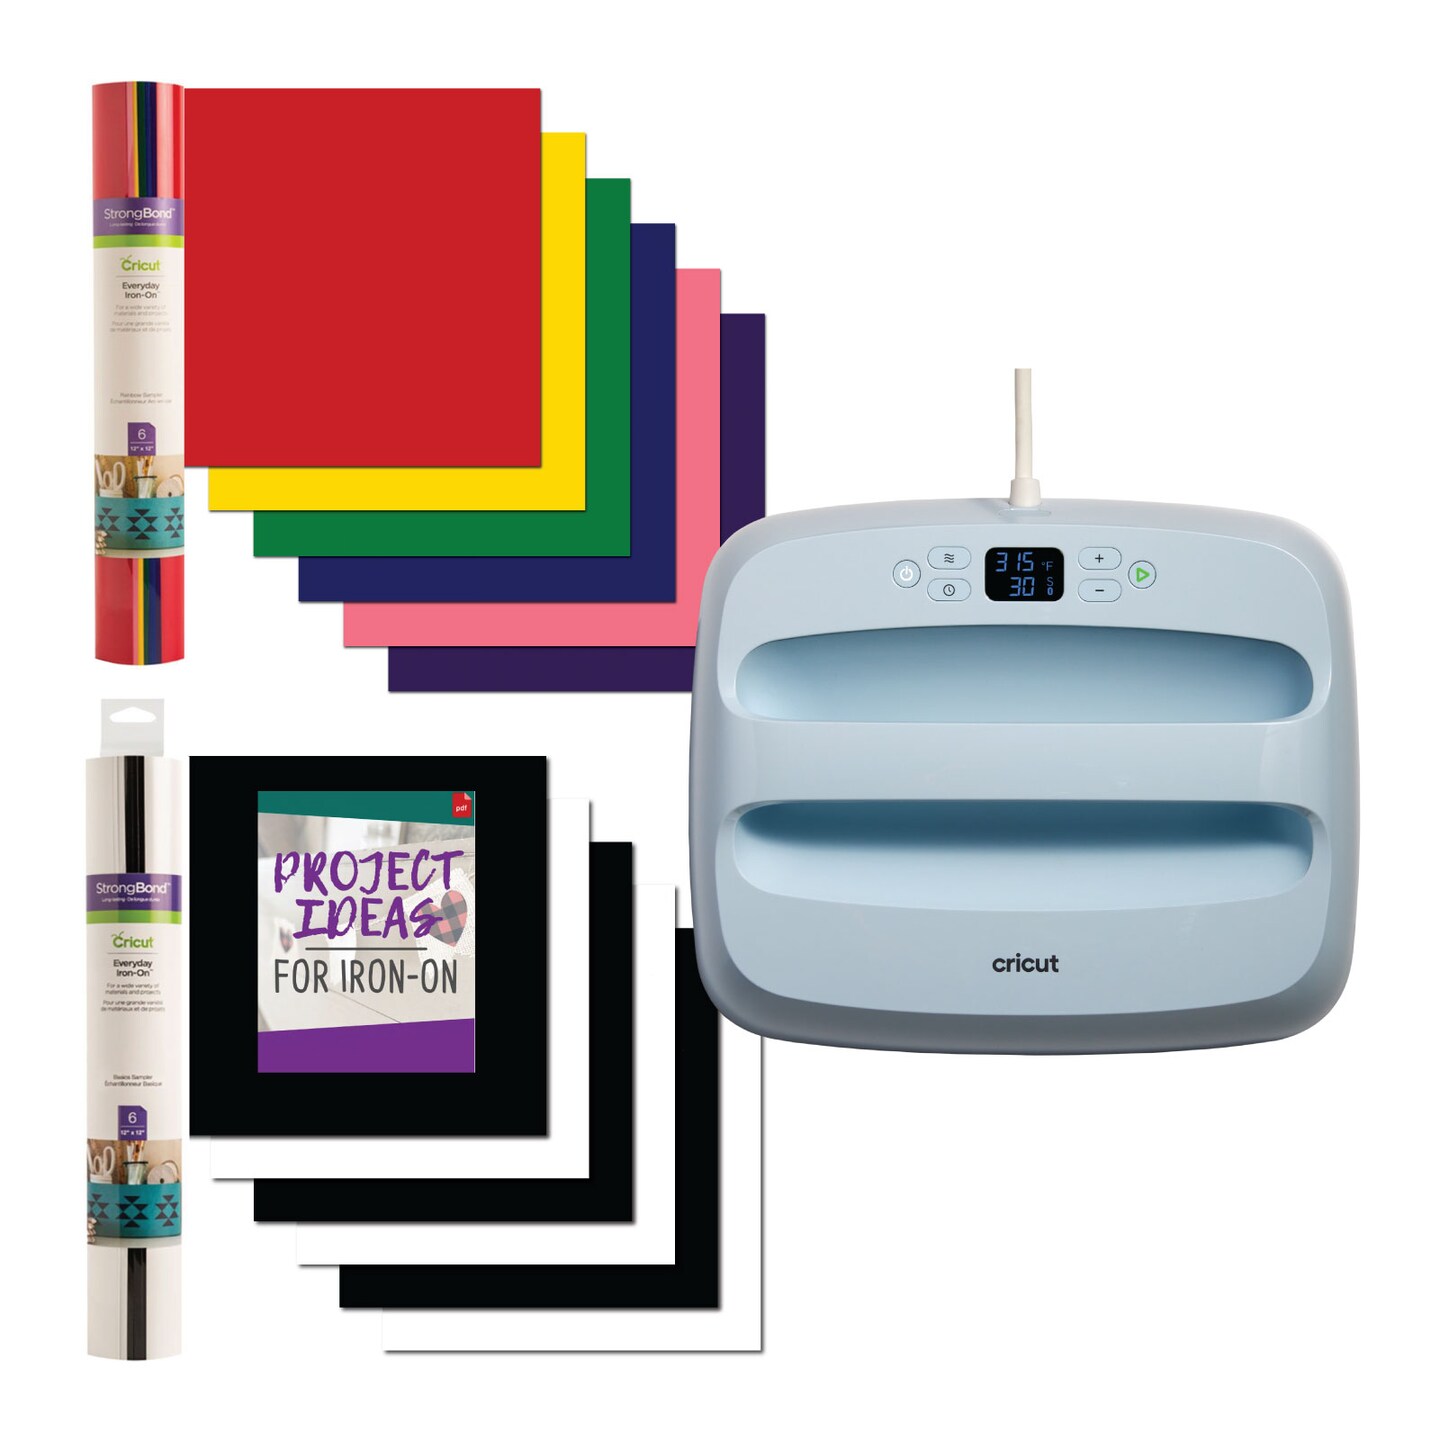 Cricut EasyPress 3 12 in x 10 in Cricut Iron-On Rainbow and Basic Samplers Bundle